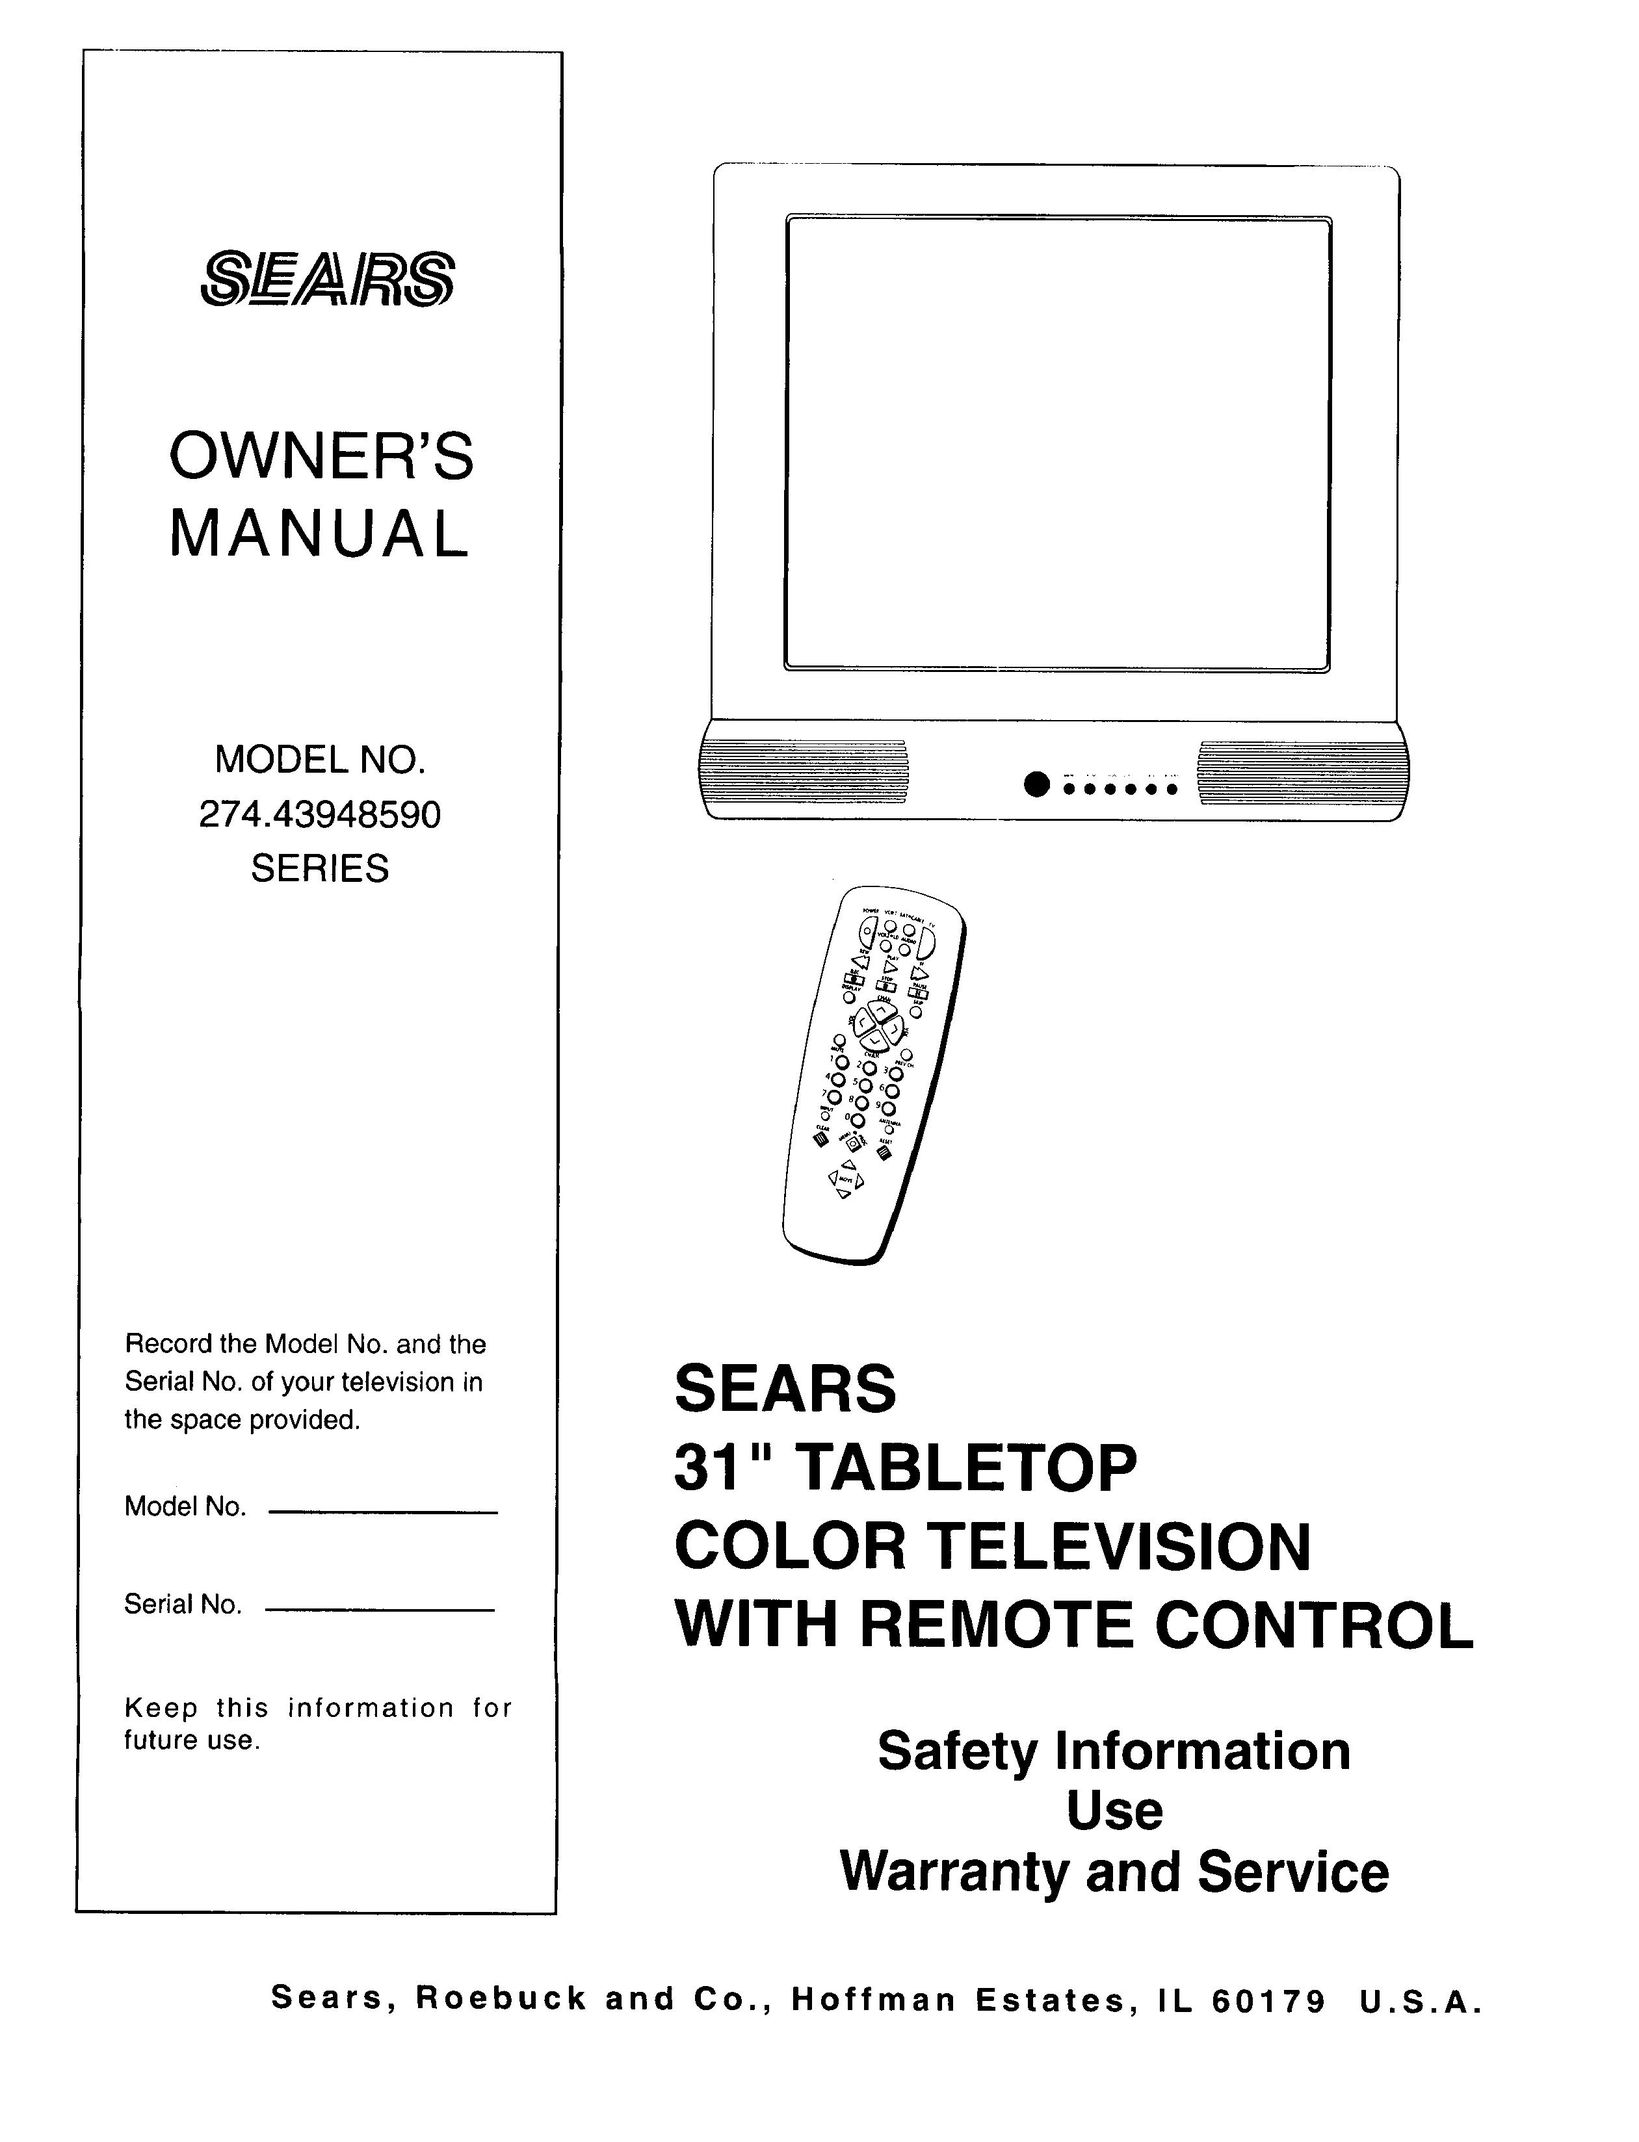 Sears 274.4394859 CRT Television User Manual